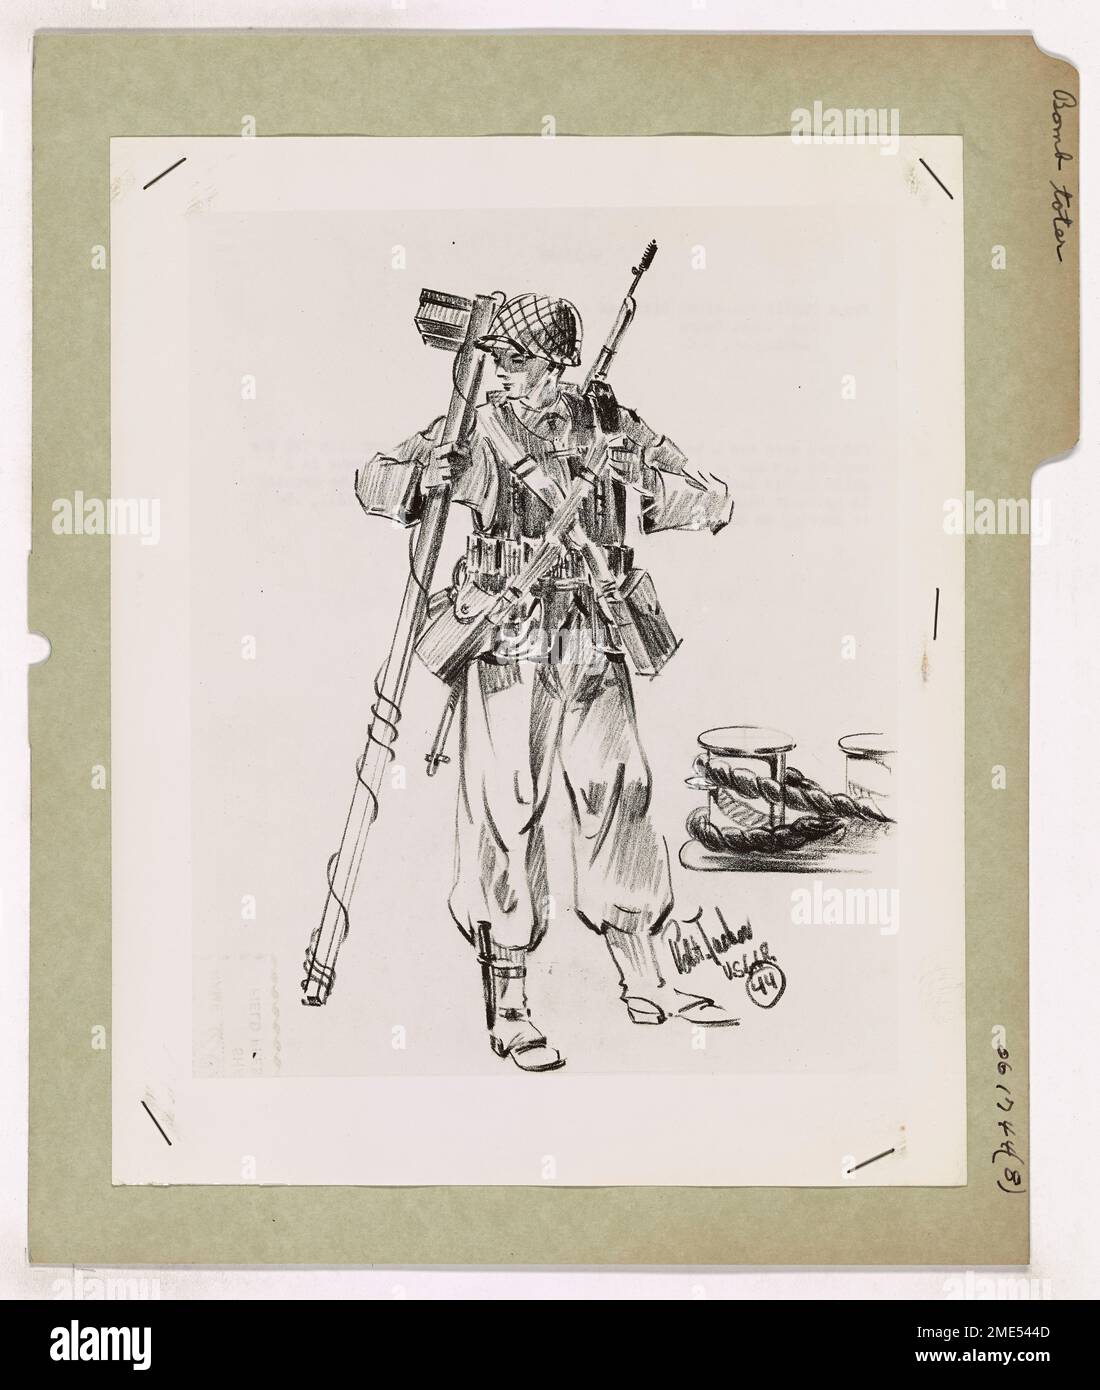 Bomb Toter. This image depicts a G.I. Joe soldier laden with TNT in the European theater of war, drawn by Coast Guard Combat Artist Robert James Tucker. Stock Photo